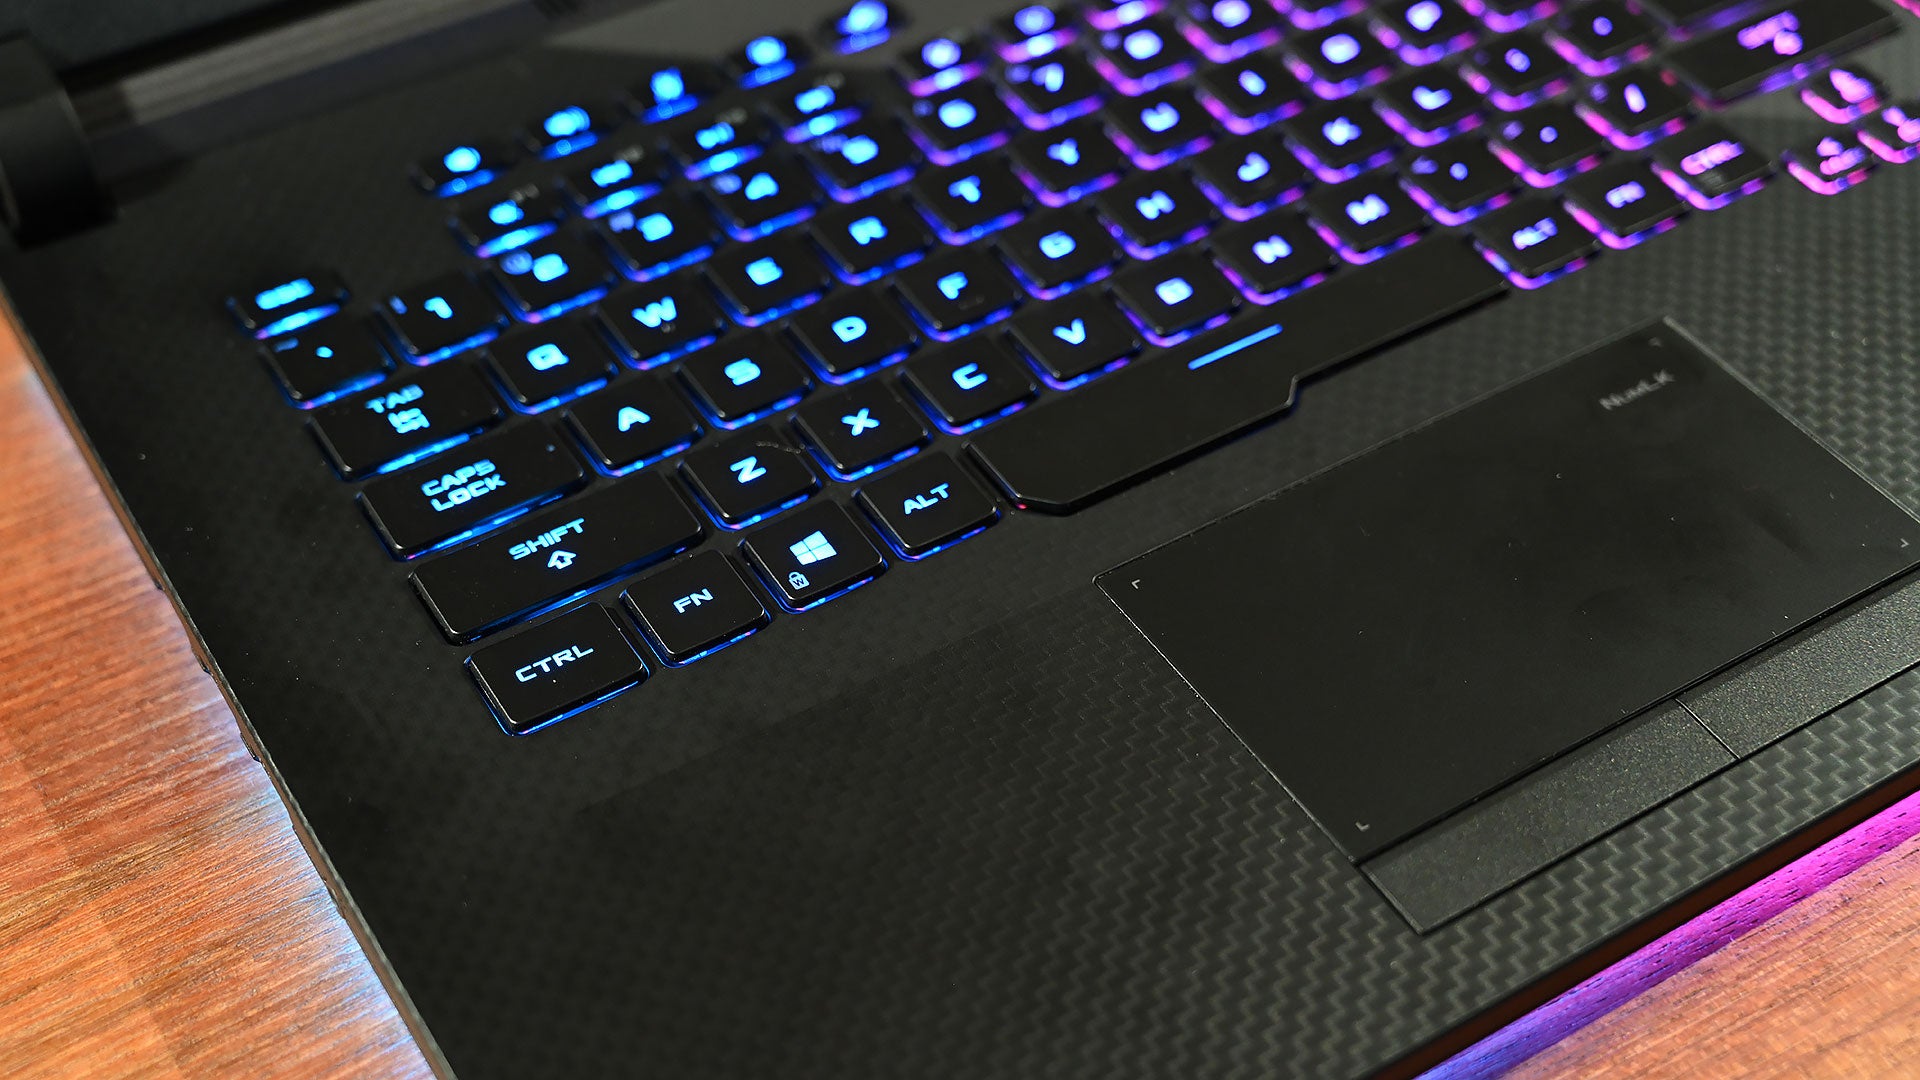 Asus Basically Overhauled Its Entire Gaming Laptop Lineup With Faster ...